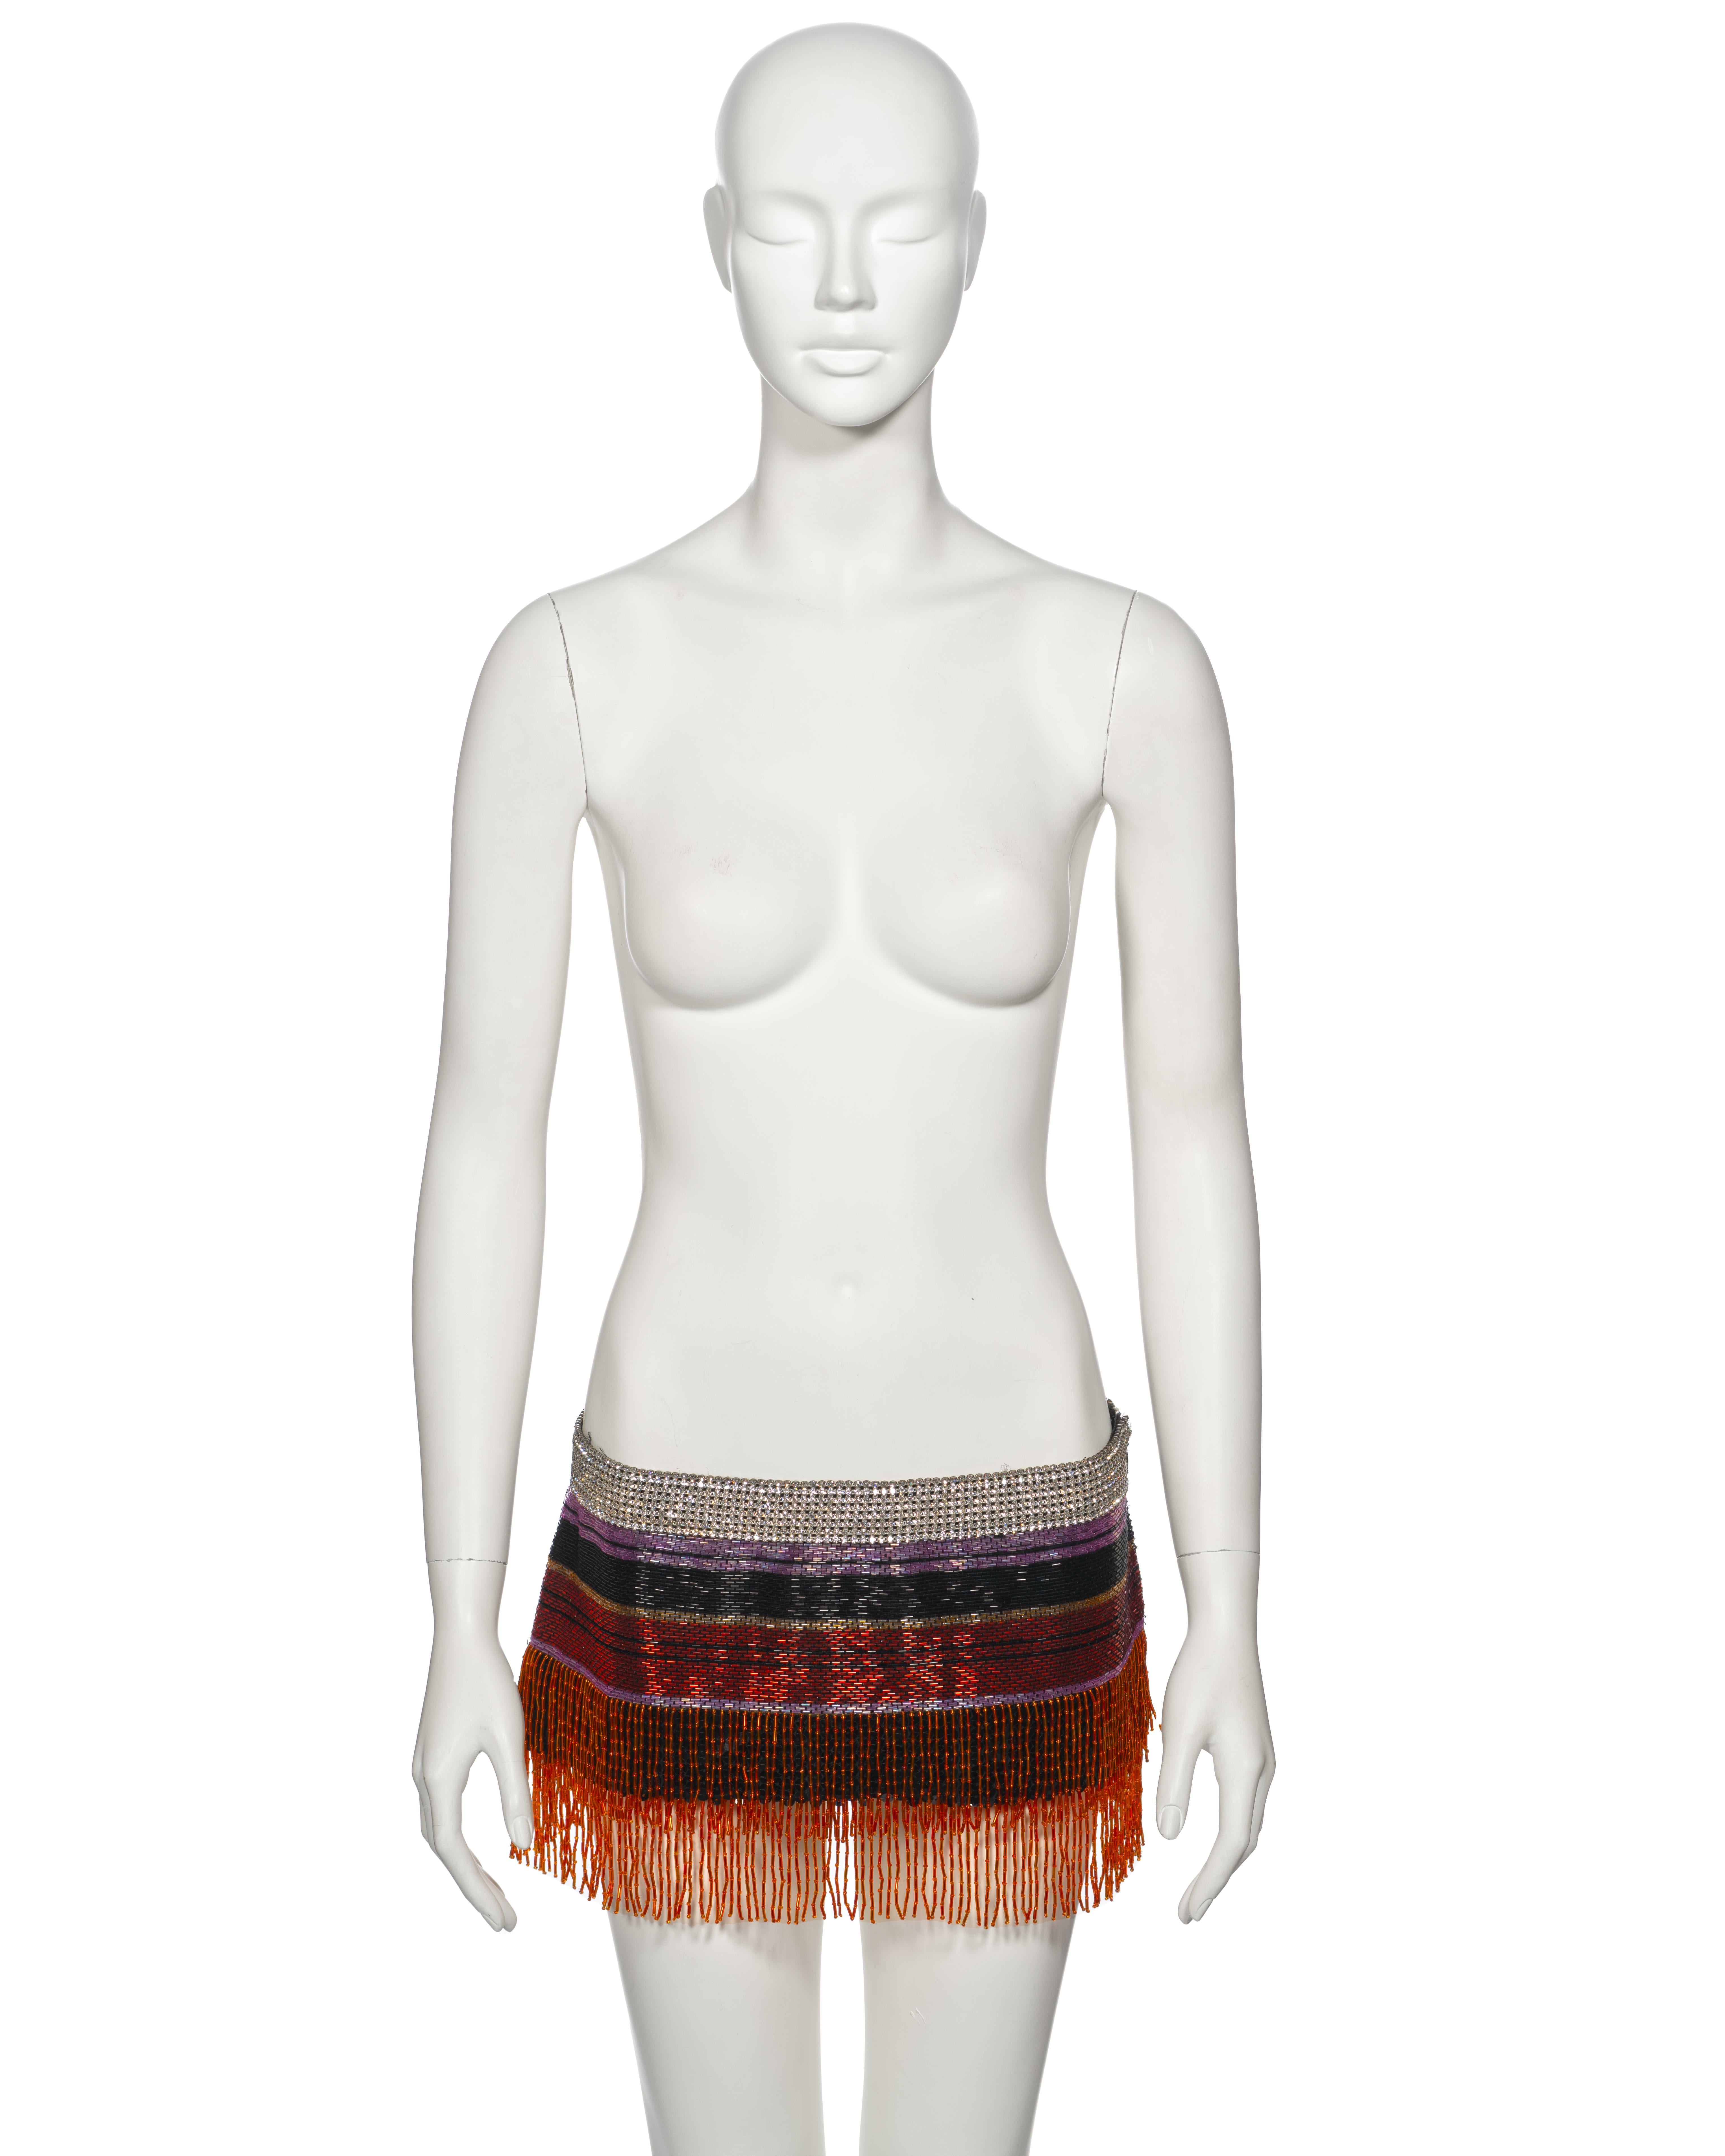 ▪ Archival Dolce & Gabbana Micro Mini Skirt 
▪ Spring-Summer 2000 
▪ Sold by One of a Kind Archive
▪ Multicoloured striped bugle bead design 
▪ Swarovski crystal mesh waistband 
▪ Tired beaded fringe trim 
▪ Sequin underlay
▪ Silk Lining  
▪ Length: